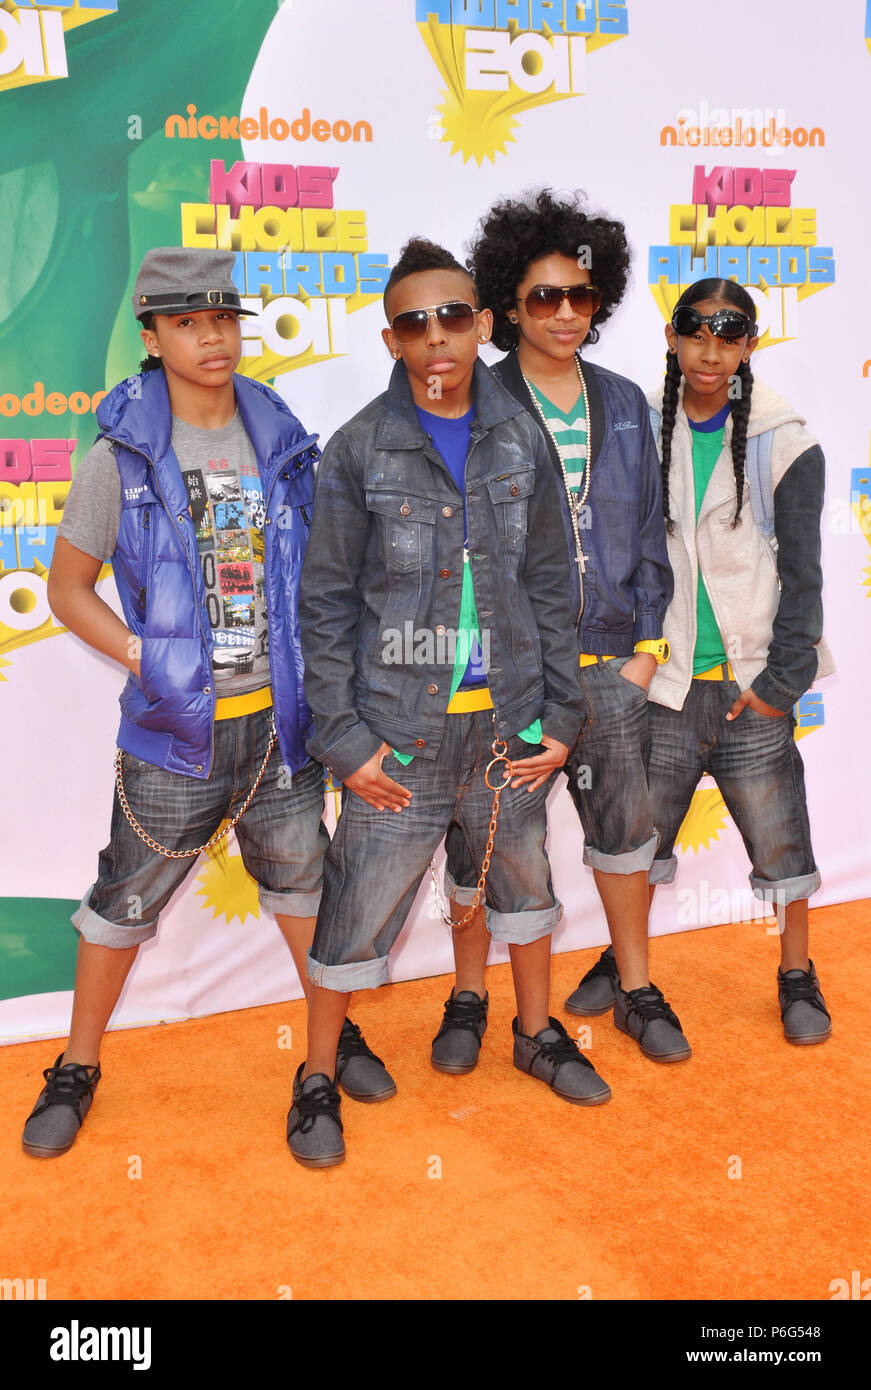 Mindless Behavior   arriving at the 24th Annual Kids' Choice Awards at USC Theatre In Los Angeles.Mindless Behavior   194  Event in Hollywood Life - California, Red Carpet Event, USA, Film Industry, Celebrities, Photography, Bestof, Arts Culture and Entertainment, Topix Celebrities fashion, Best of, Hollywood Life, Event in Hollywood Life - California, Red Carpet and backstage, ,Arts Culture and Entertainment, Photography,    inquiry tsuni@Gamma-USA.com ,  Music celebrities, Musician, Music Group, 2010Mindless Behavior   194  Event in Hollywood Life - California, Red Carpet Event, USA, Film In Stock Photo